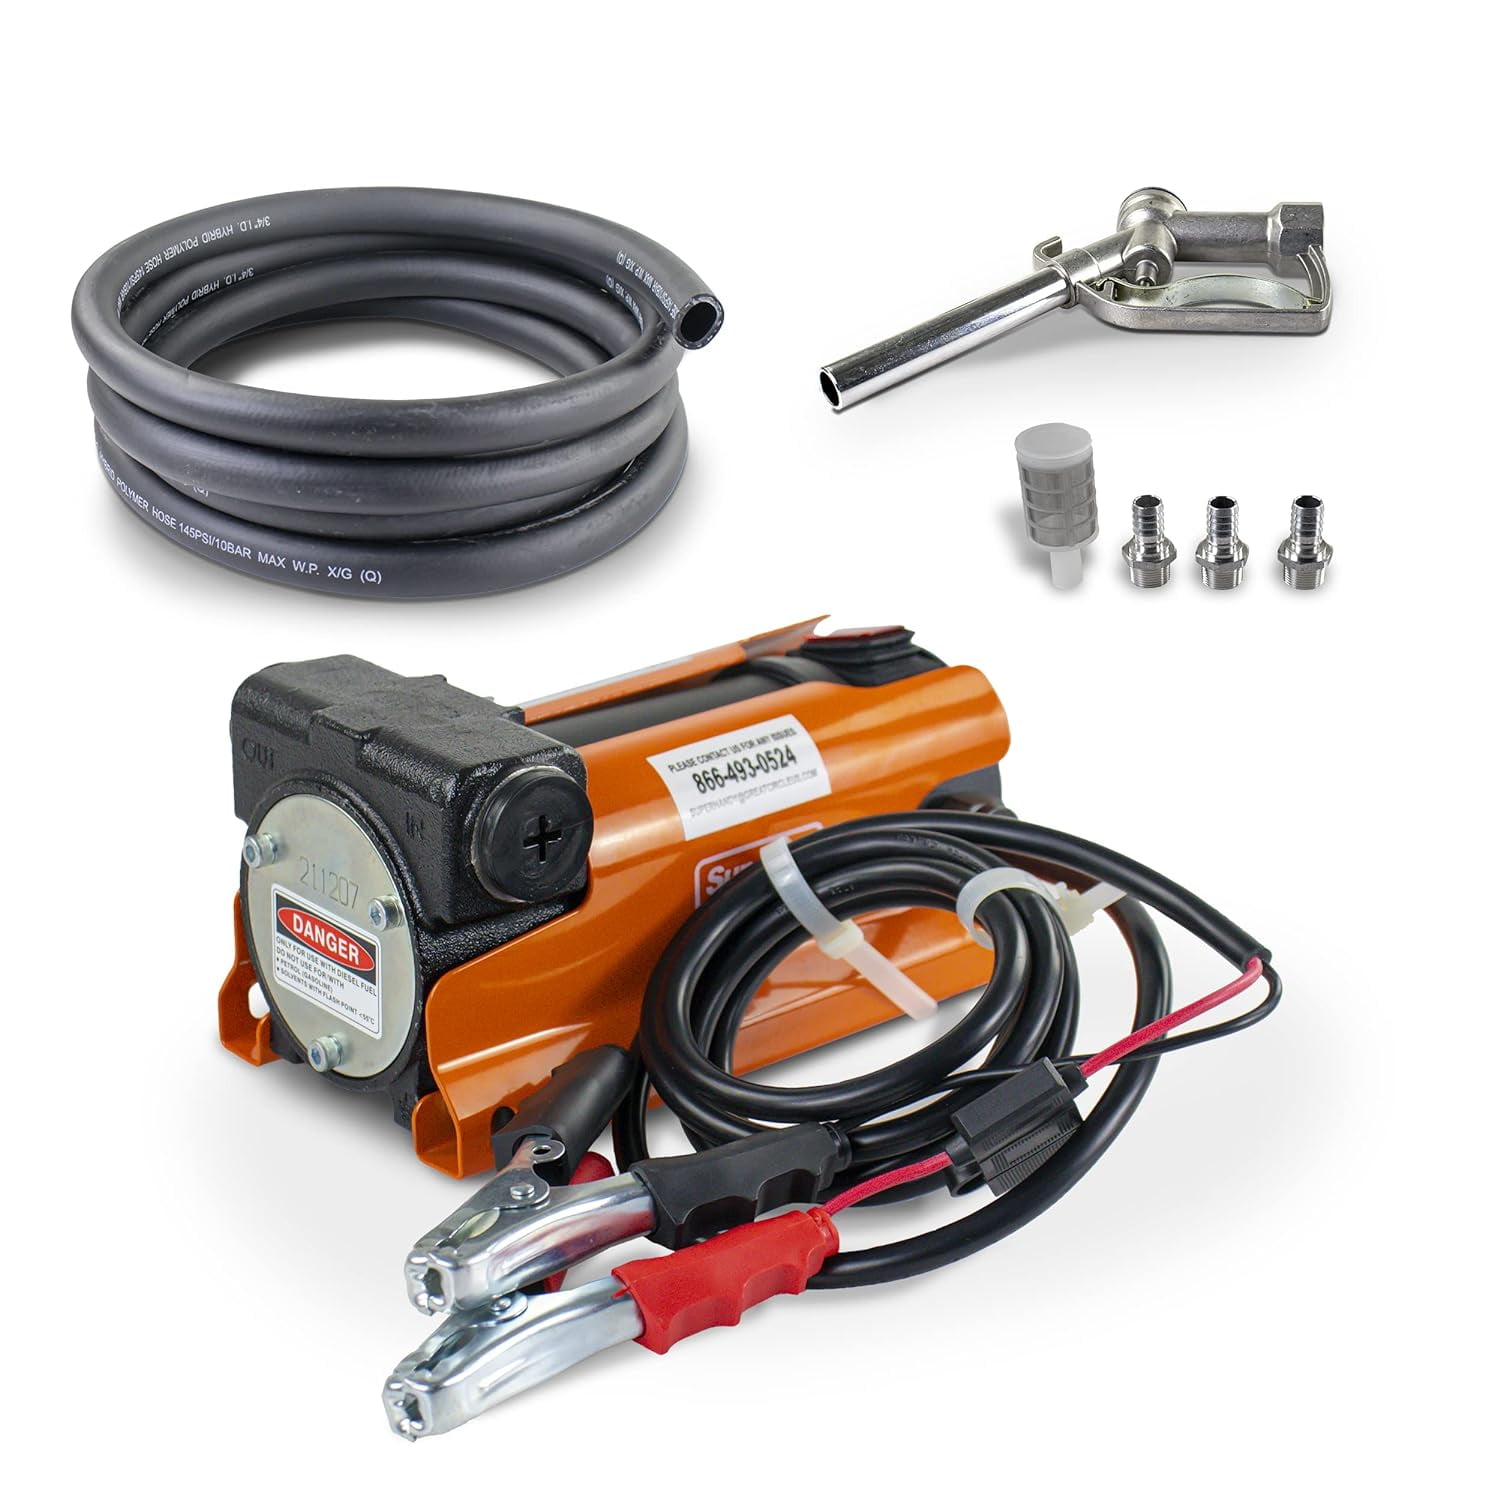 SuperHandy Diesel Transfer Pump Kit 10GPM/40LPM Heavy Duty Portable  Electric DC 12V Alligator Clamps includes: Aluminum Manual Nozzle, Delivery  & Suction Hose w/Filter (NOT For Gasoline) 